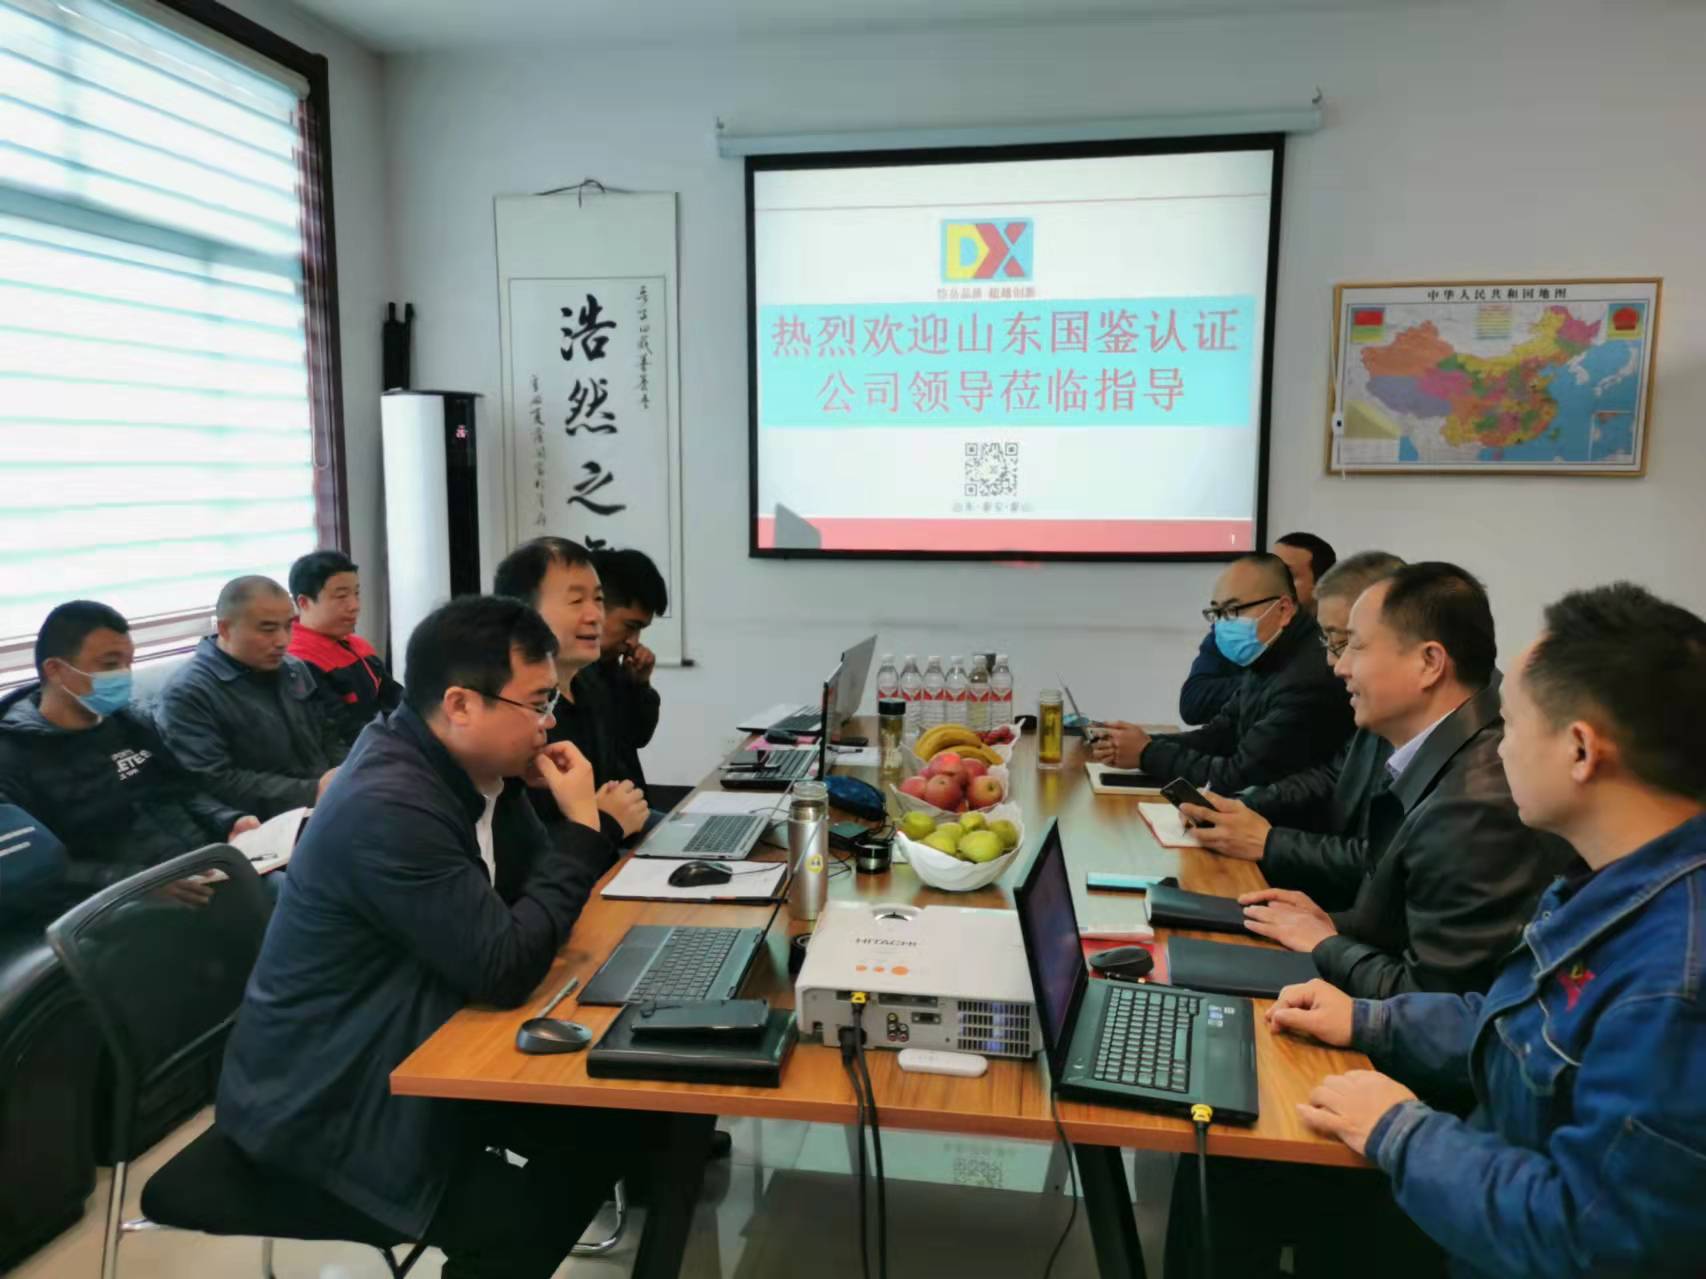 Shandong Daixin Intelligent Technology Co., Ltd. passed the three-system certification audit of quality, environment and occupational health